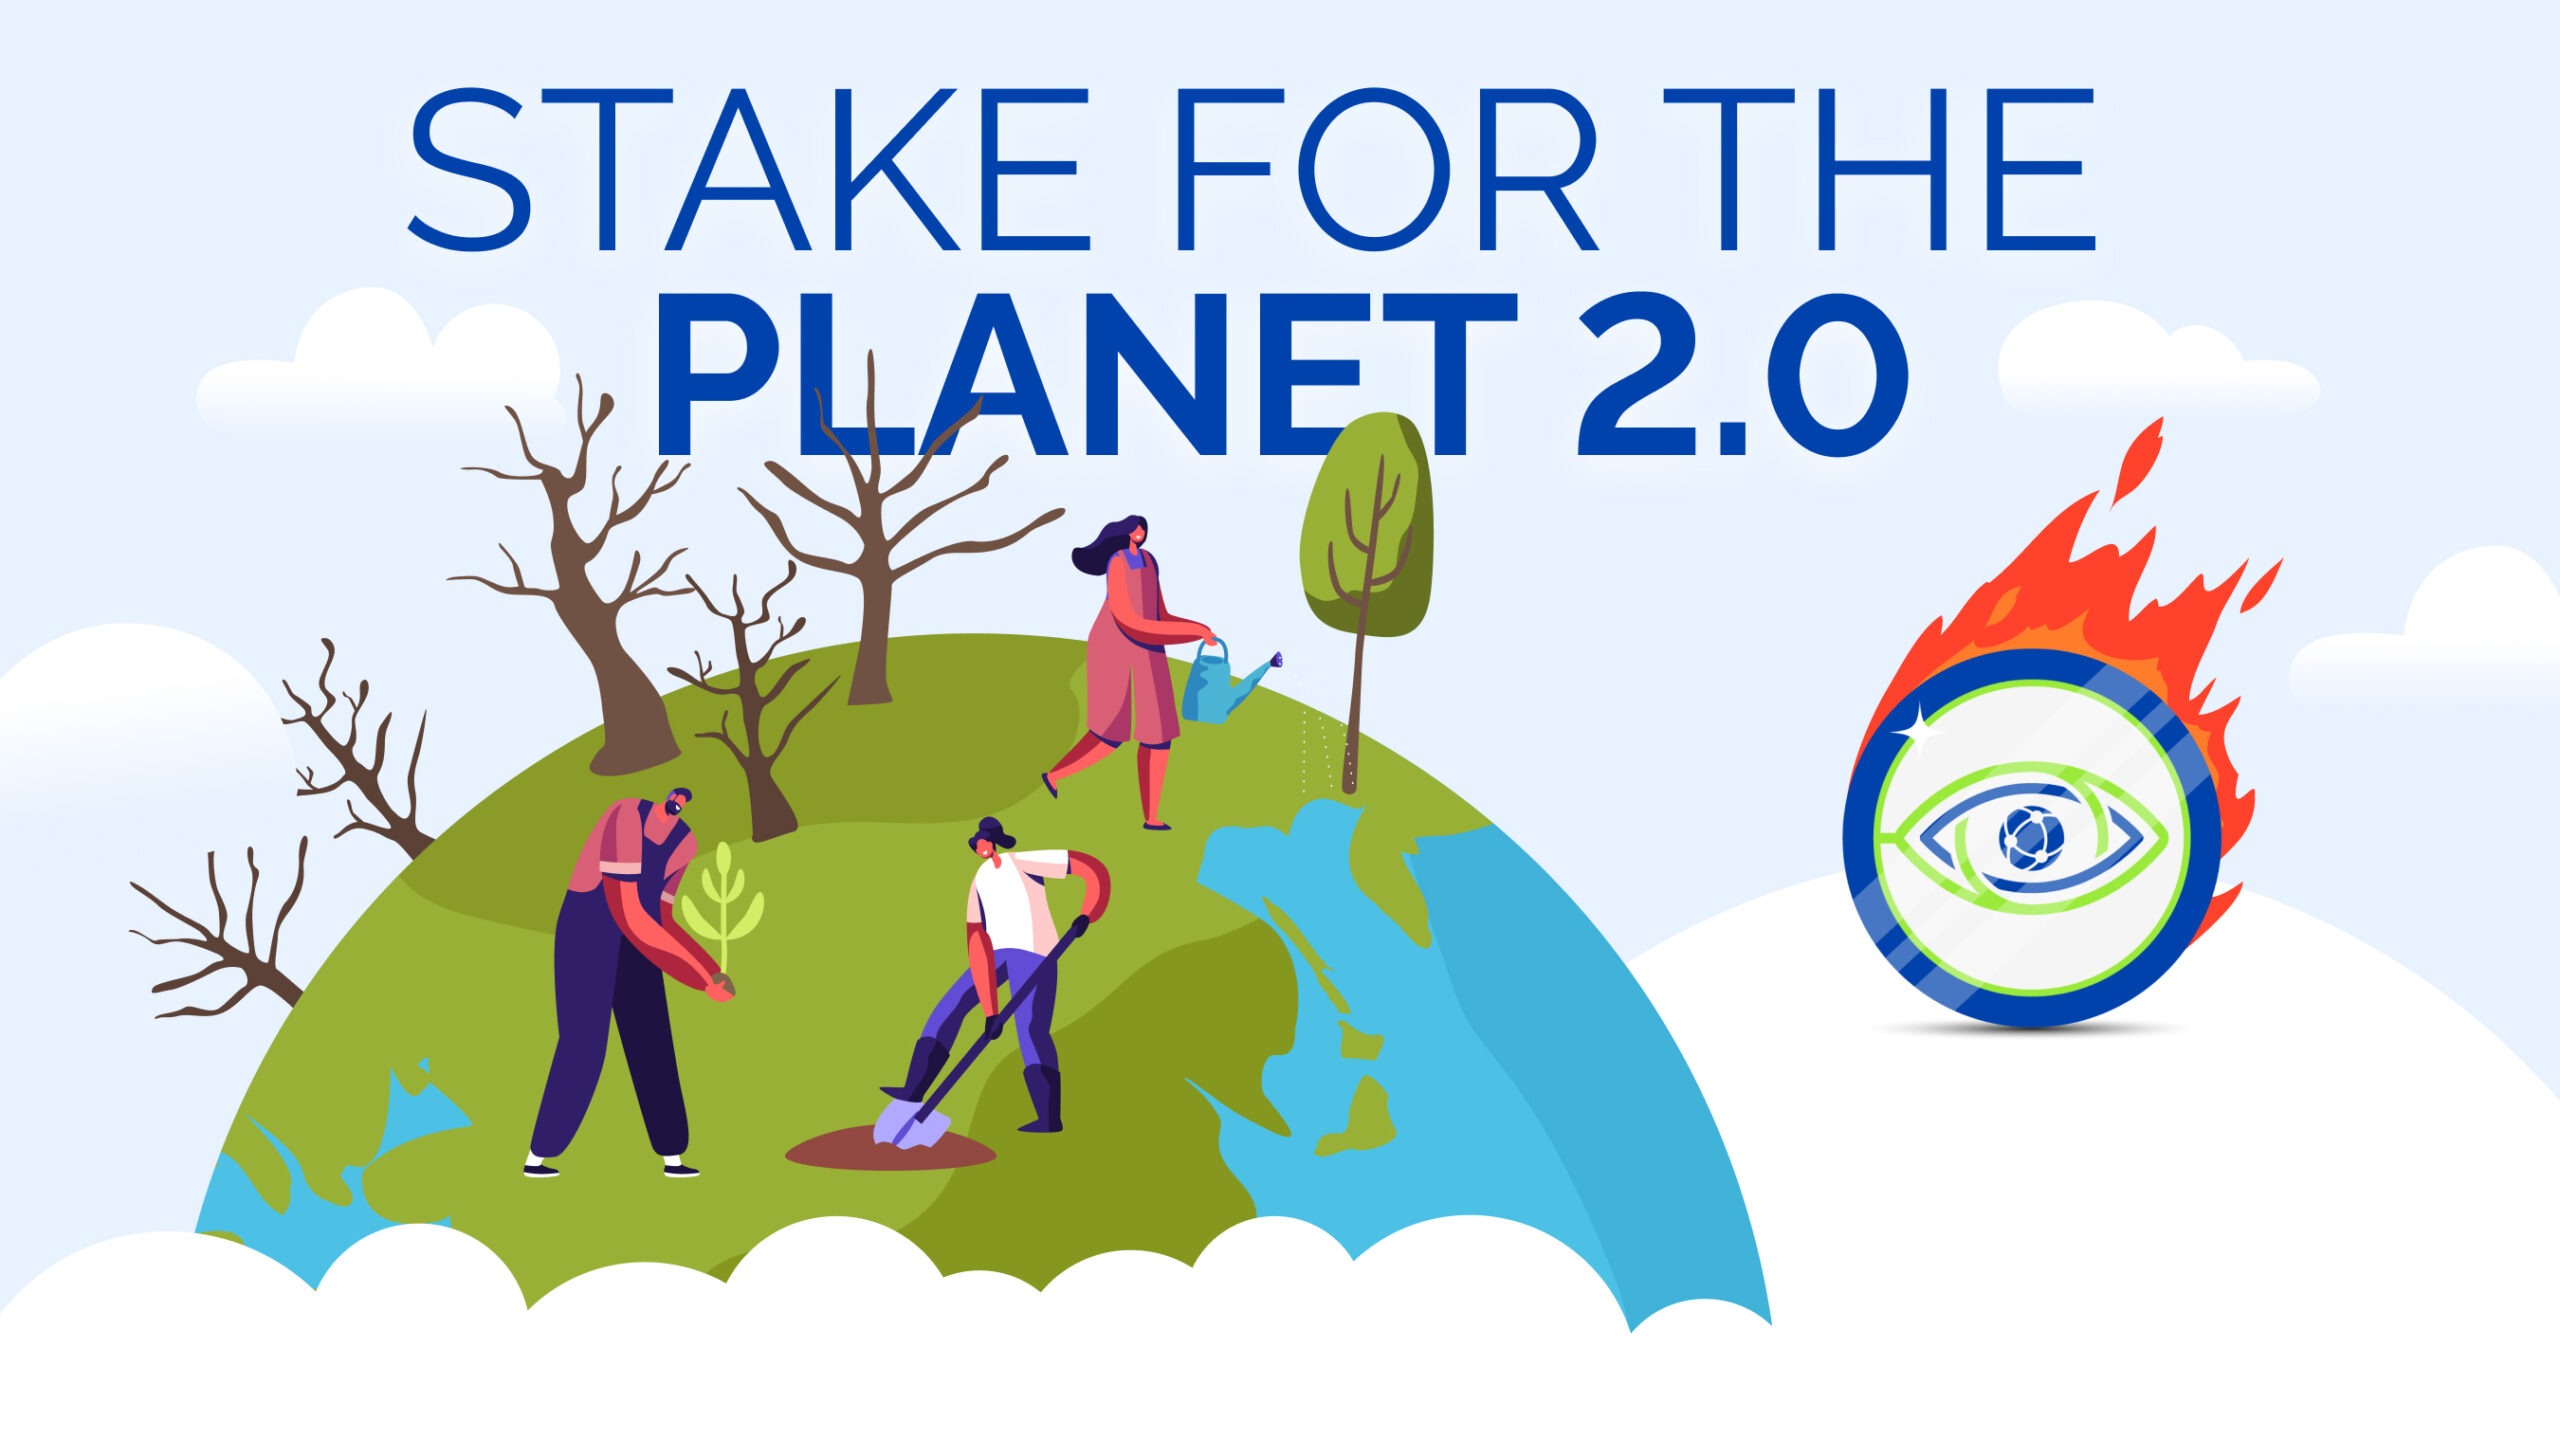 Stake for the Planet 2.0 - PlanetWatch